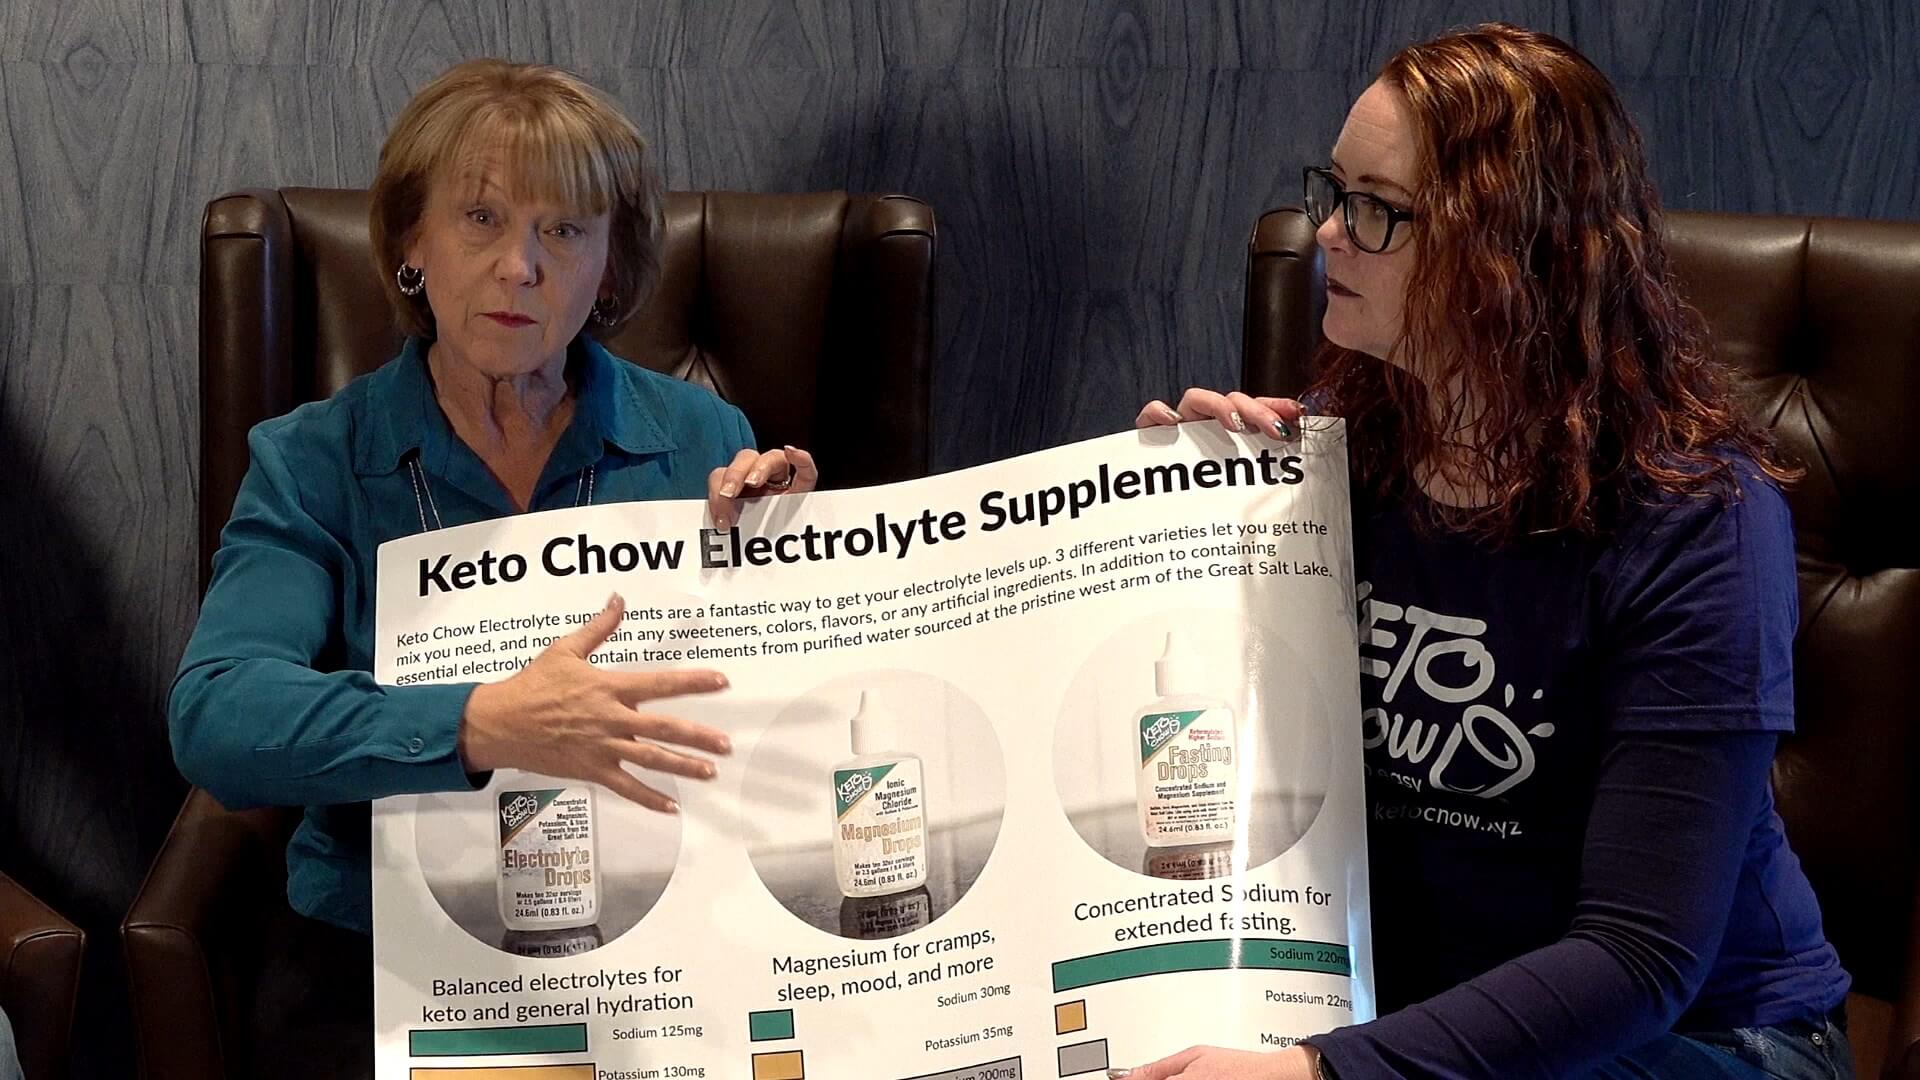 keto chow electrolyte supplements